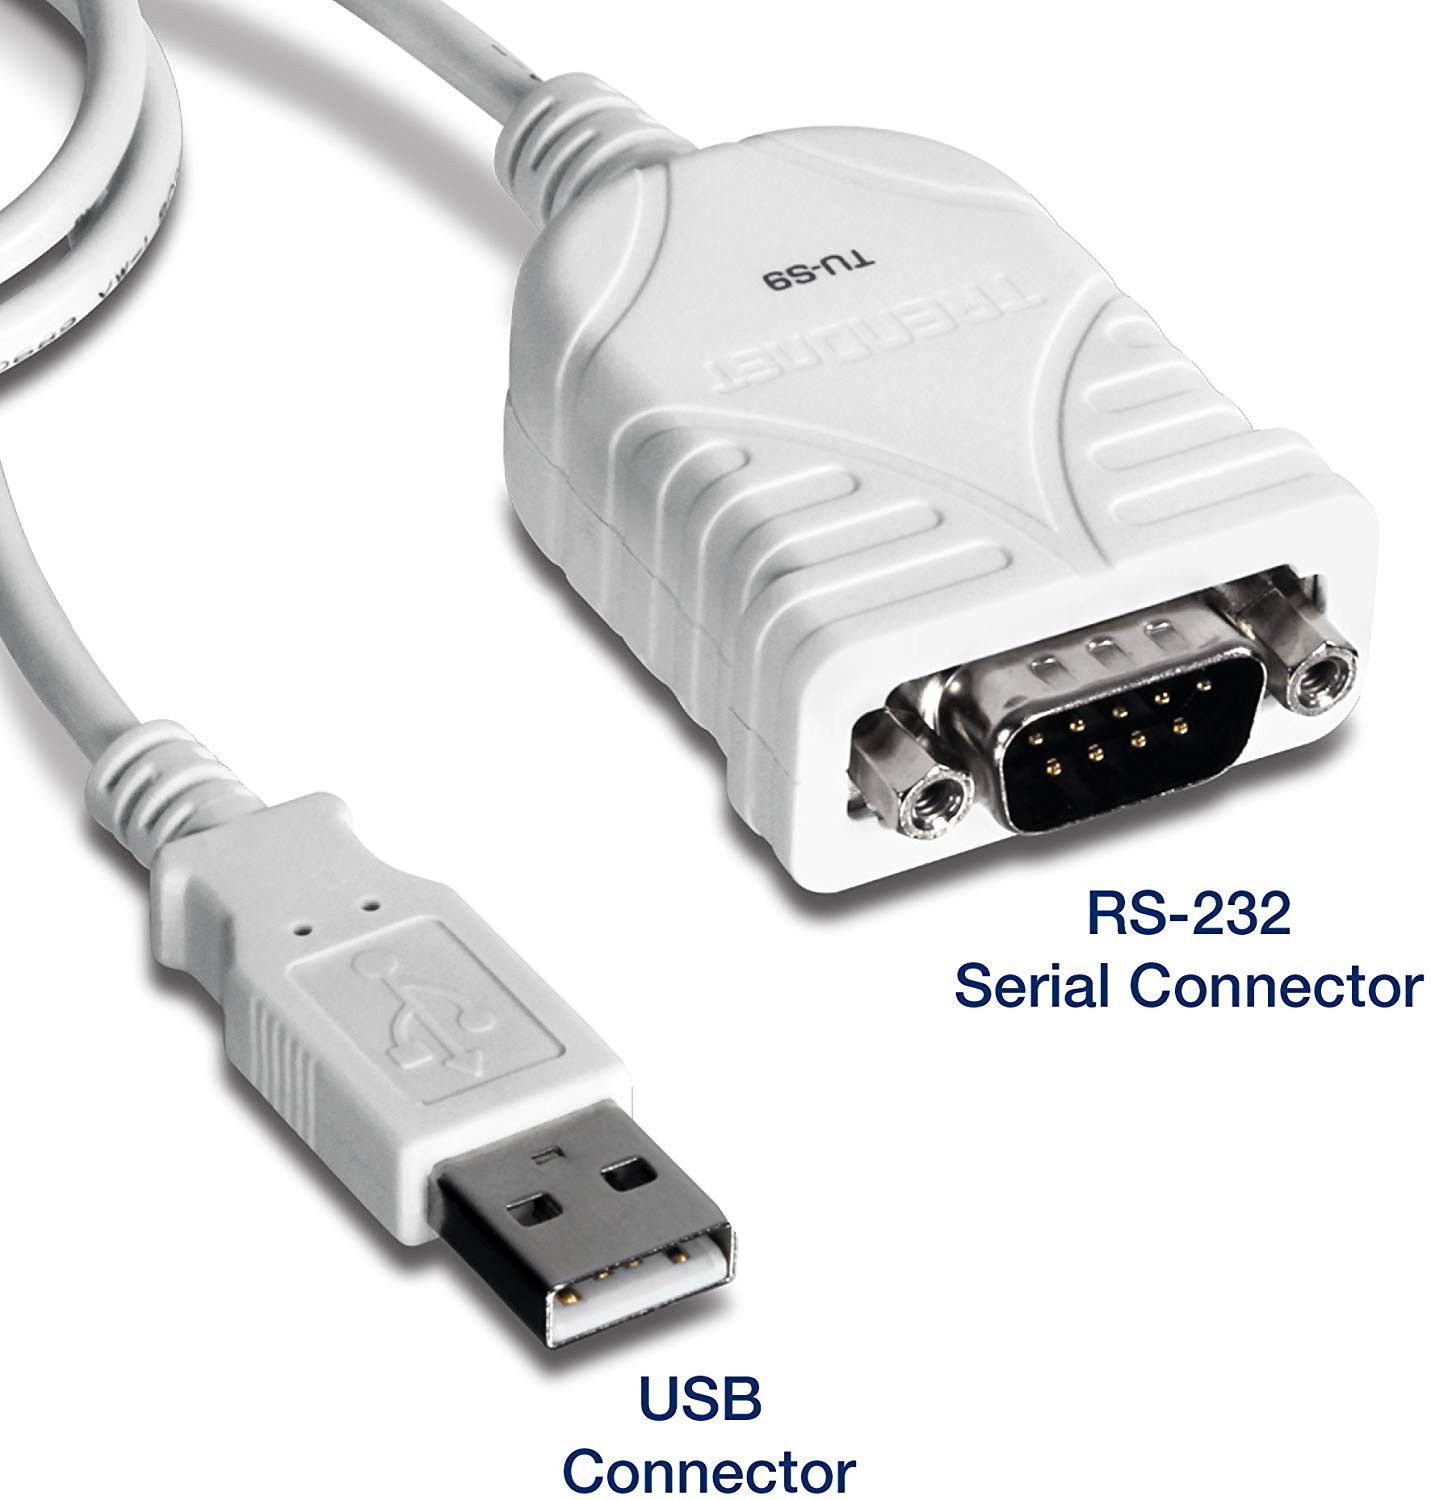 TRENDnet USB to Serial Converter, Connect a RS-232 Serial Device to a USB 2.0 Port, Easy Installation, Universal Plug & Play, TU-S9